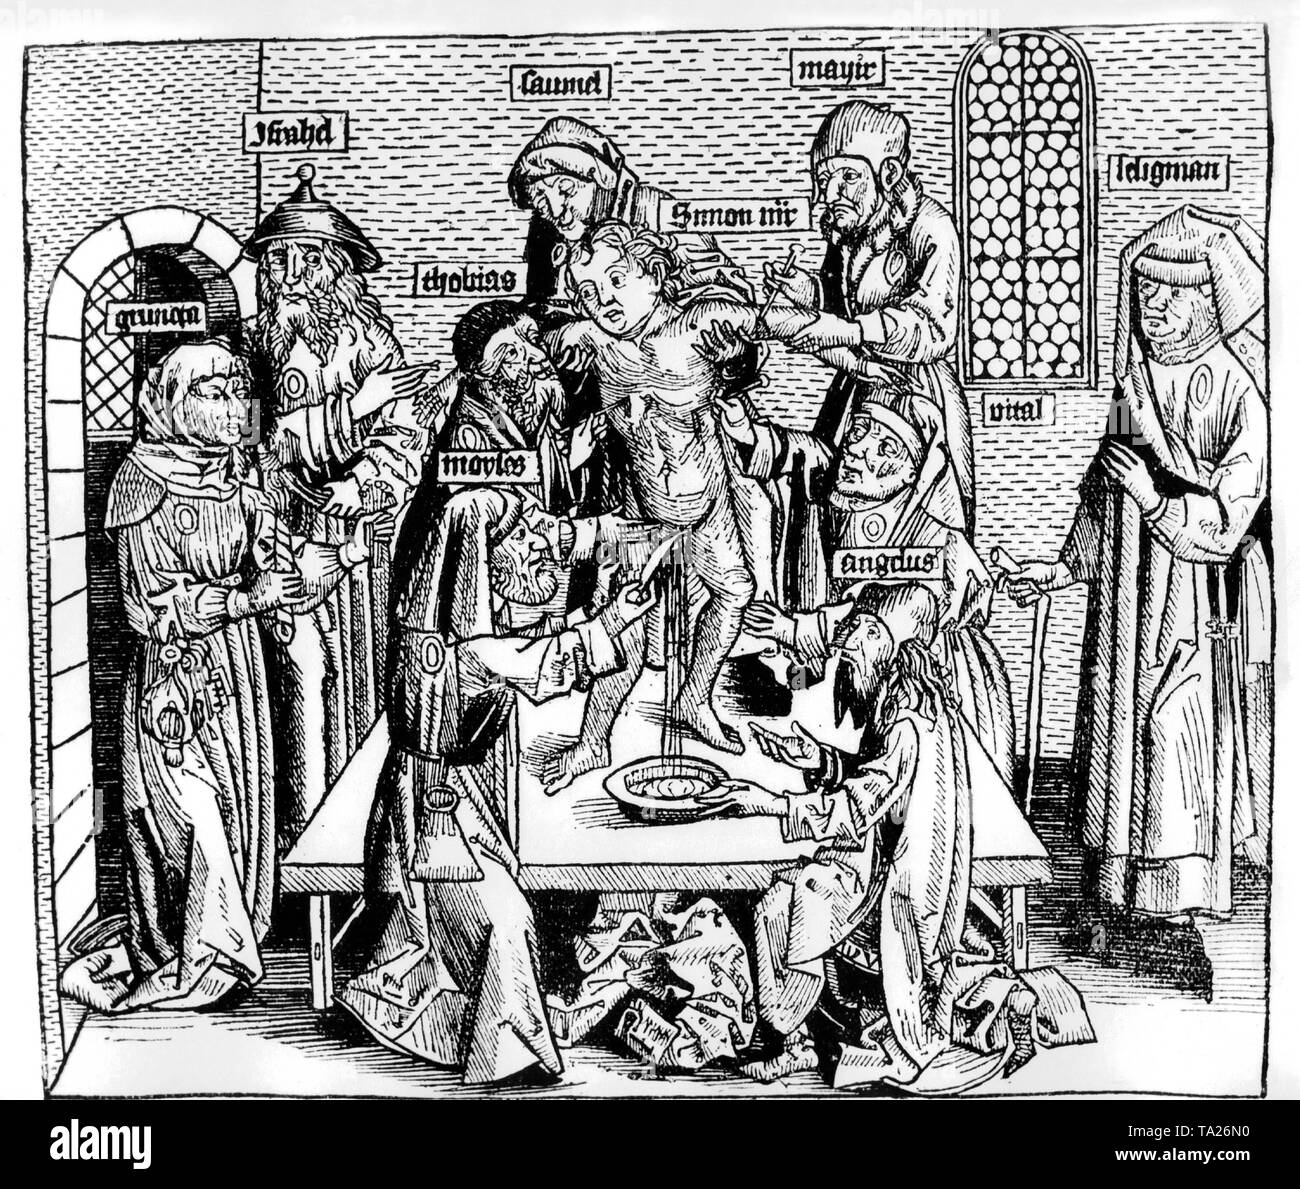 Anti-Semitic illustration of the ritual murder of a boy by Jews of Trento from the 15th century. Woodcut by Wohlgemuth from the Chronicle of the World by Schedel, Nuremberg, Koberger, 1493. Stock Photo